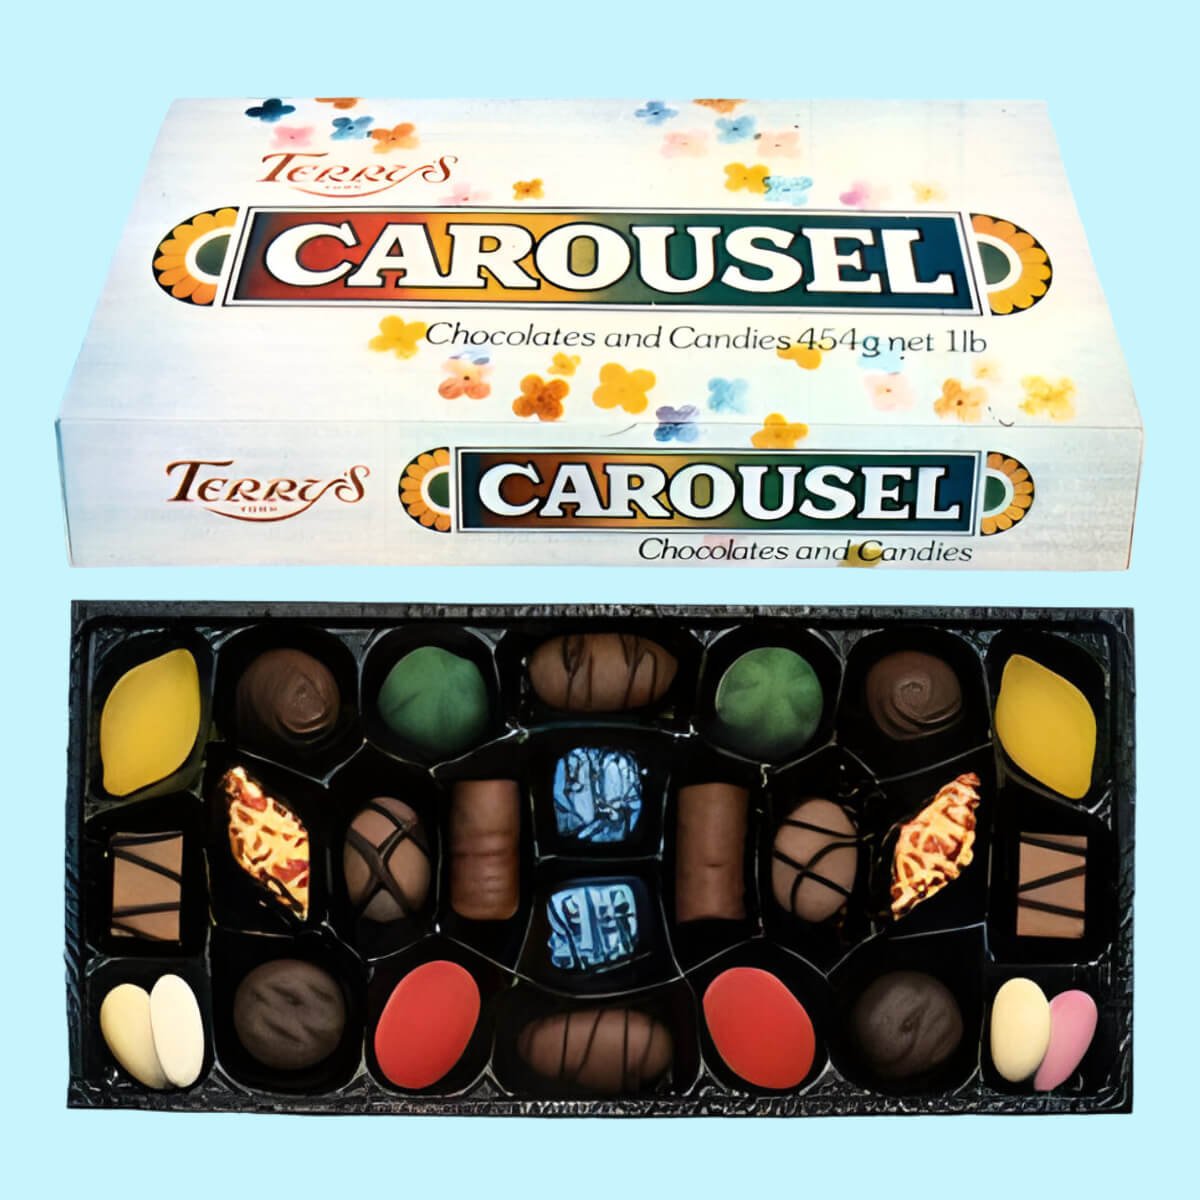 A box of Terry's Carousel with its lid removed exposing the contents.